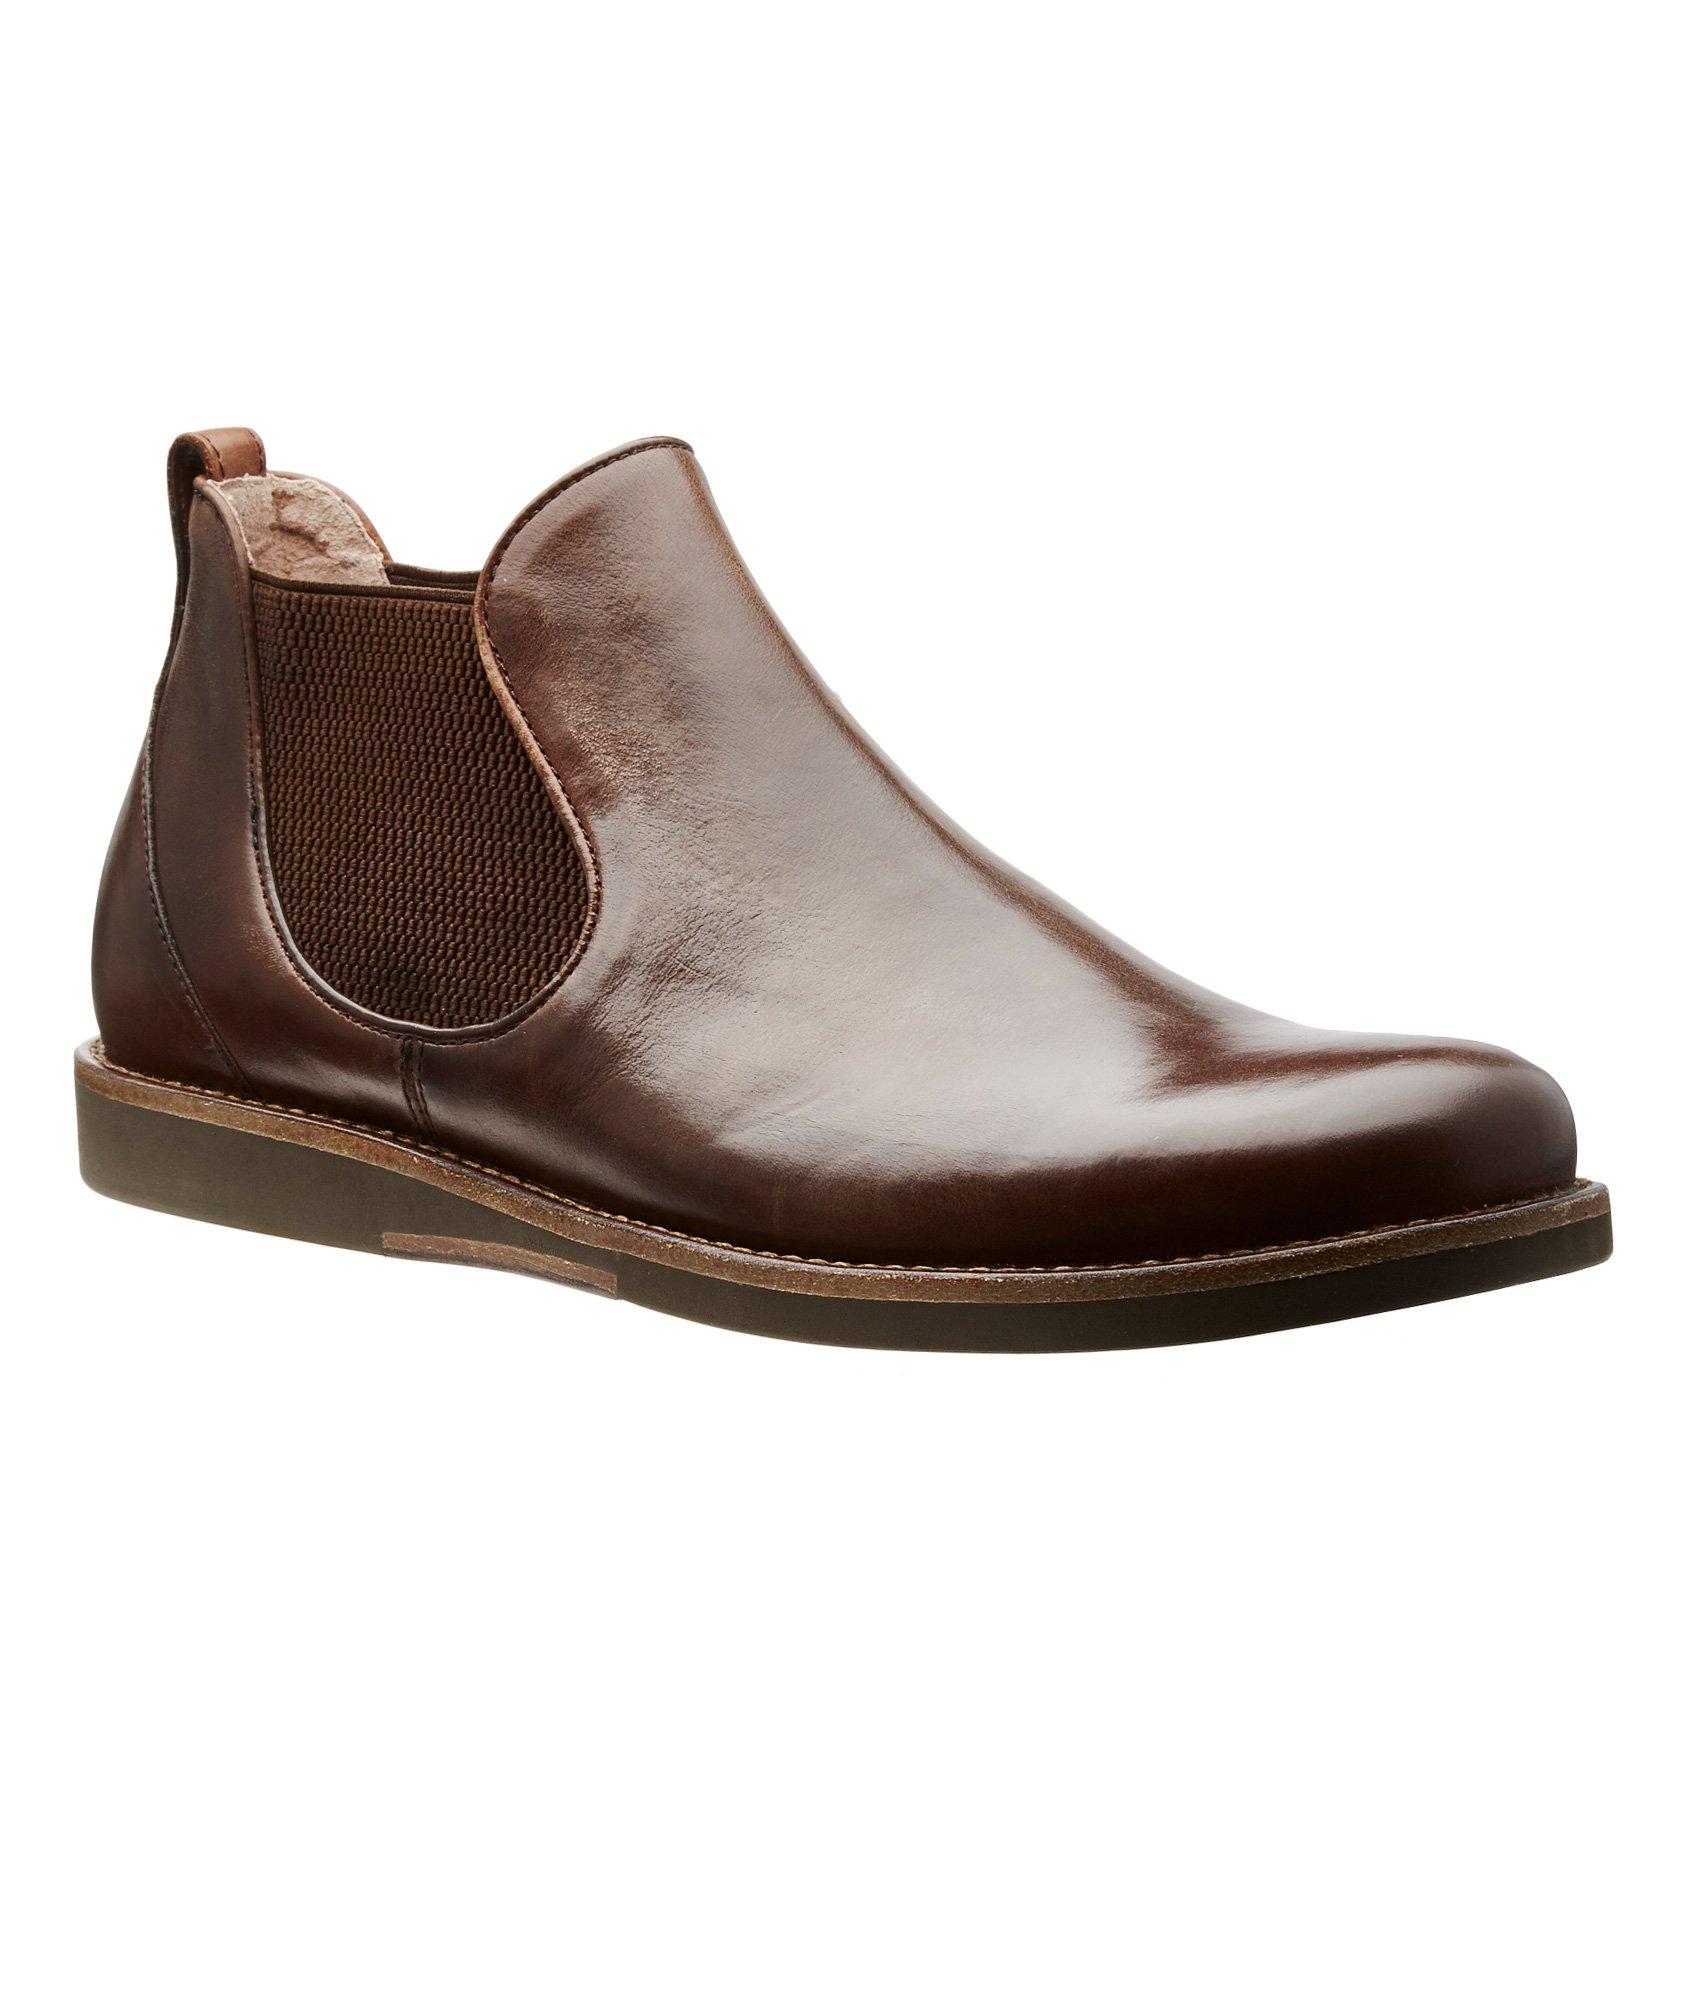 Leather Chelsea Boots image 0